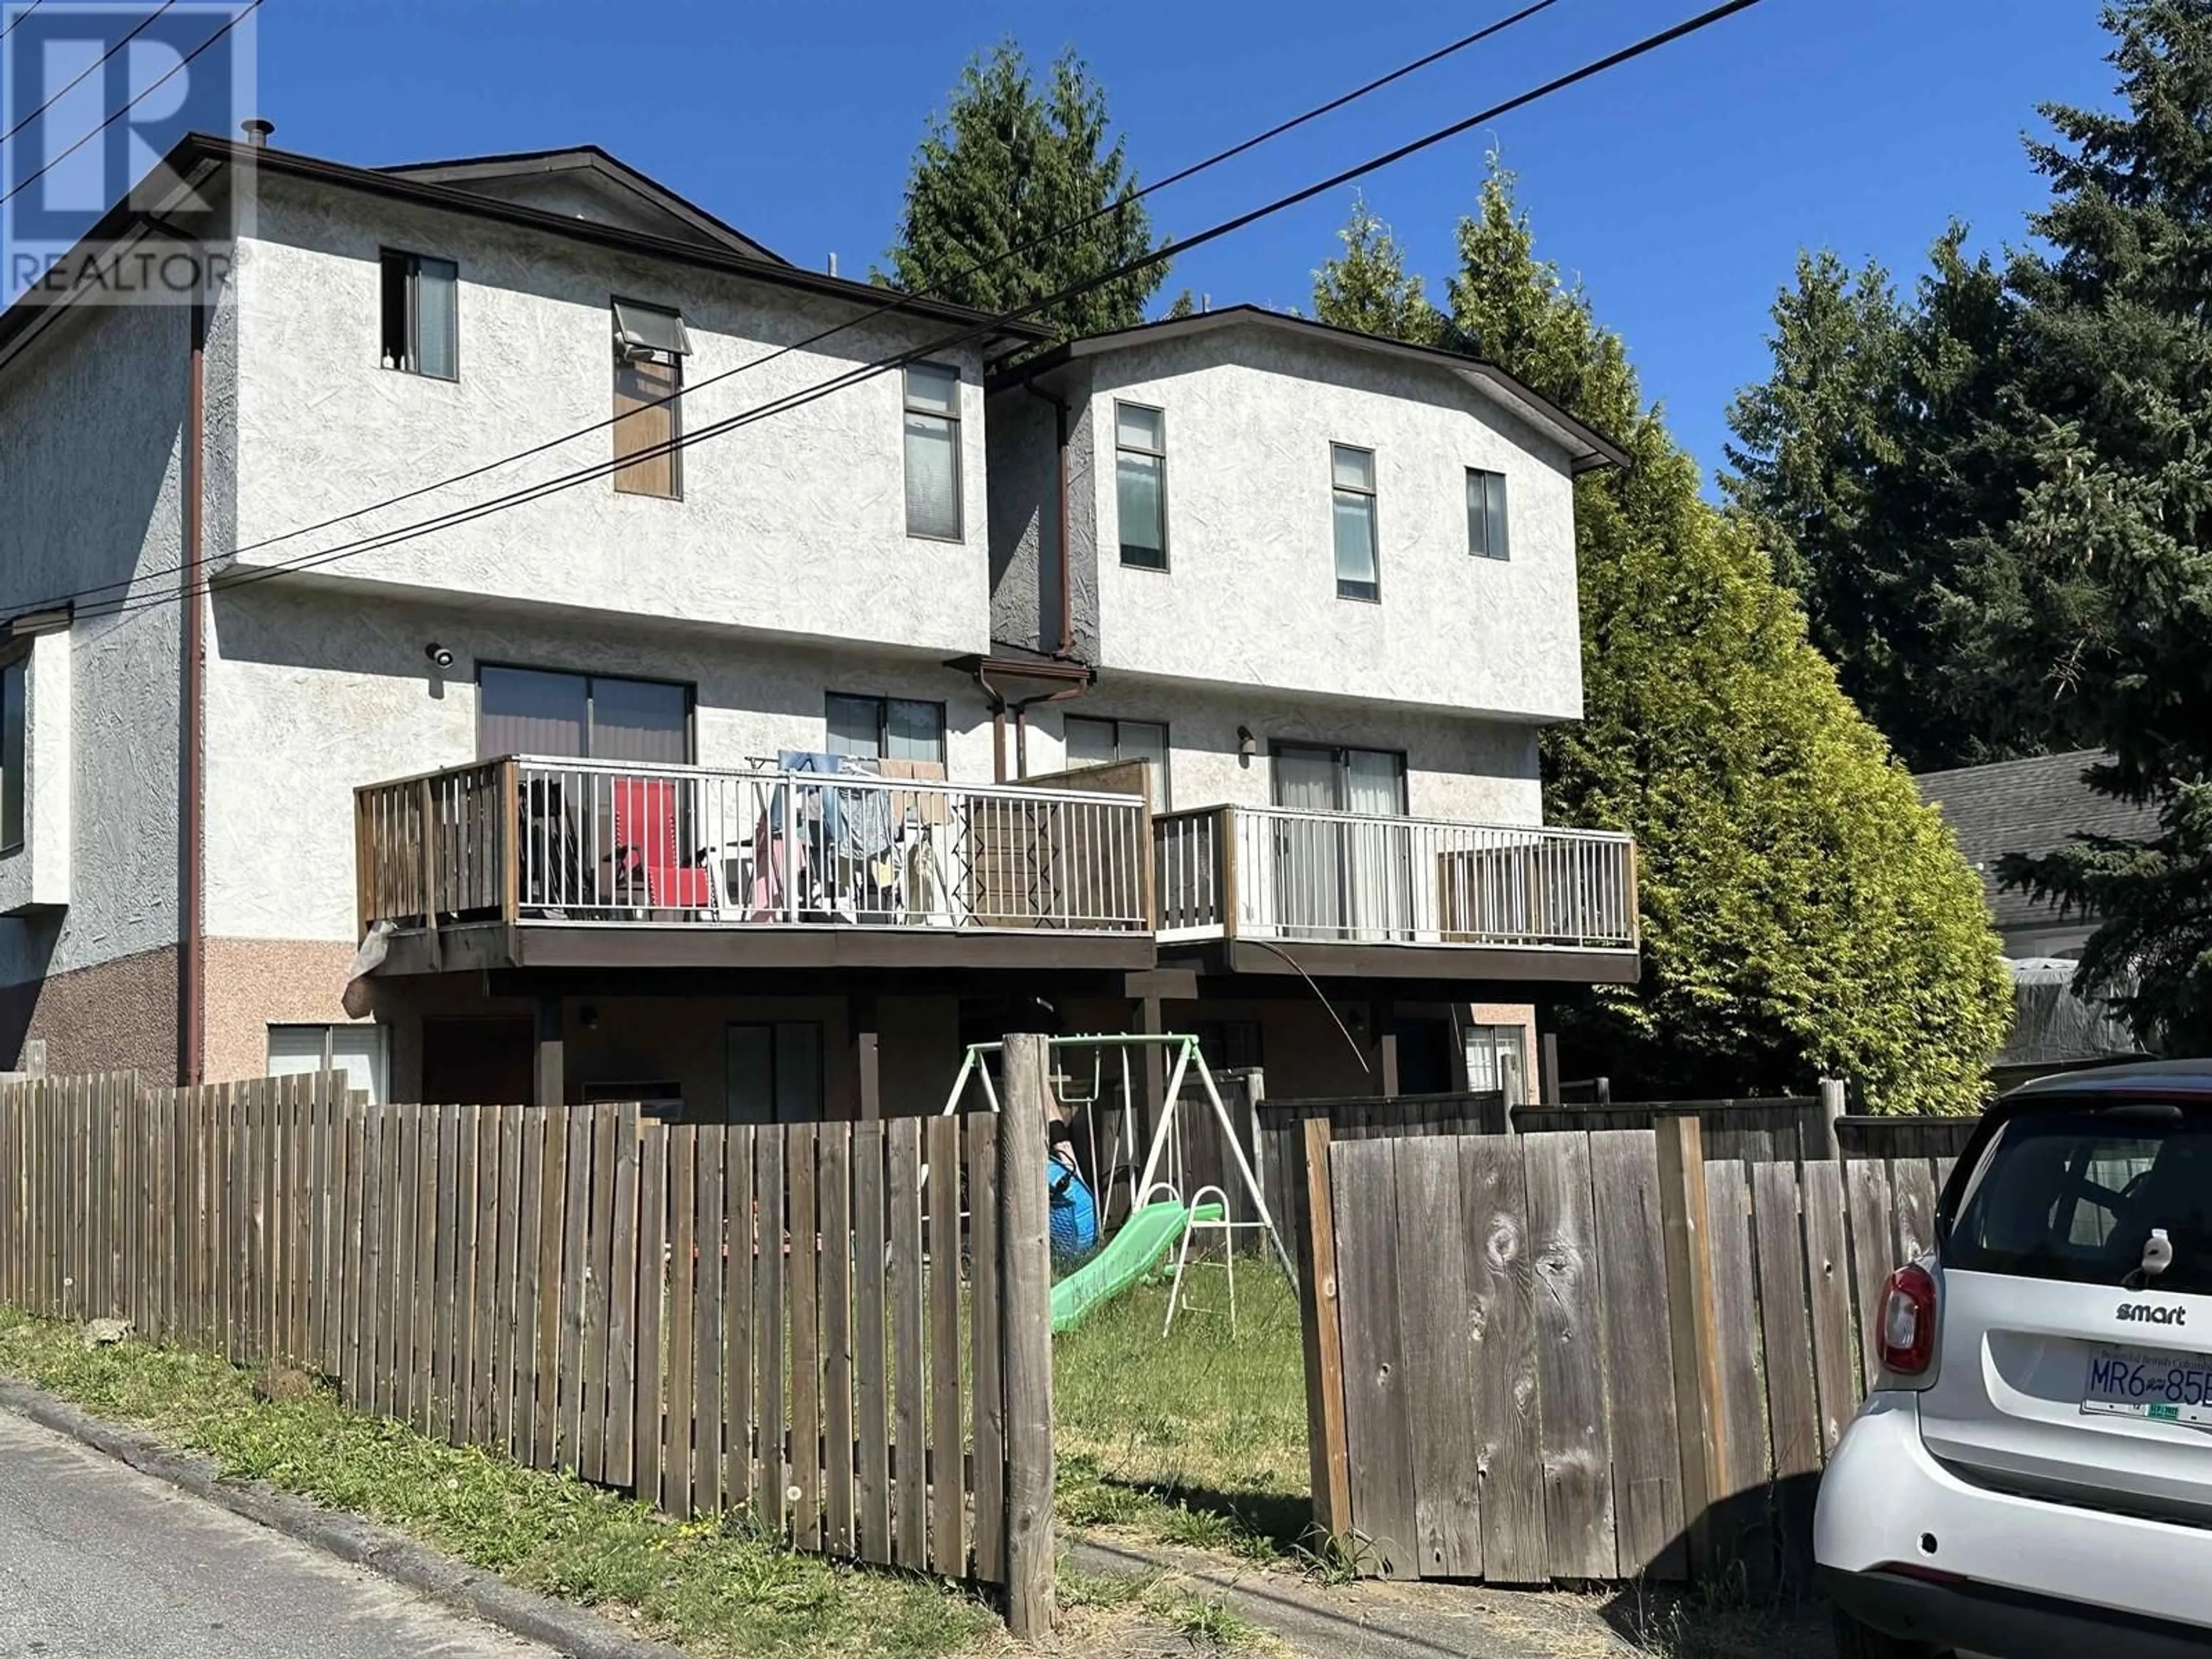 Frontside or backside of a home for 234B HART STREET, Coquitlam British Columbia V3K4A4